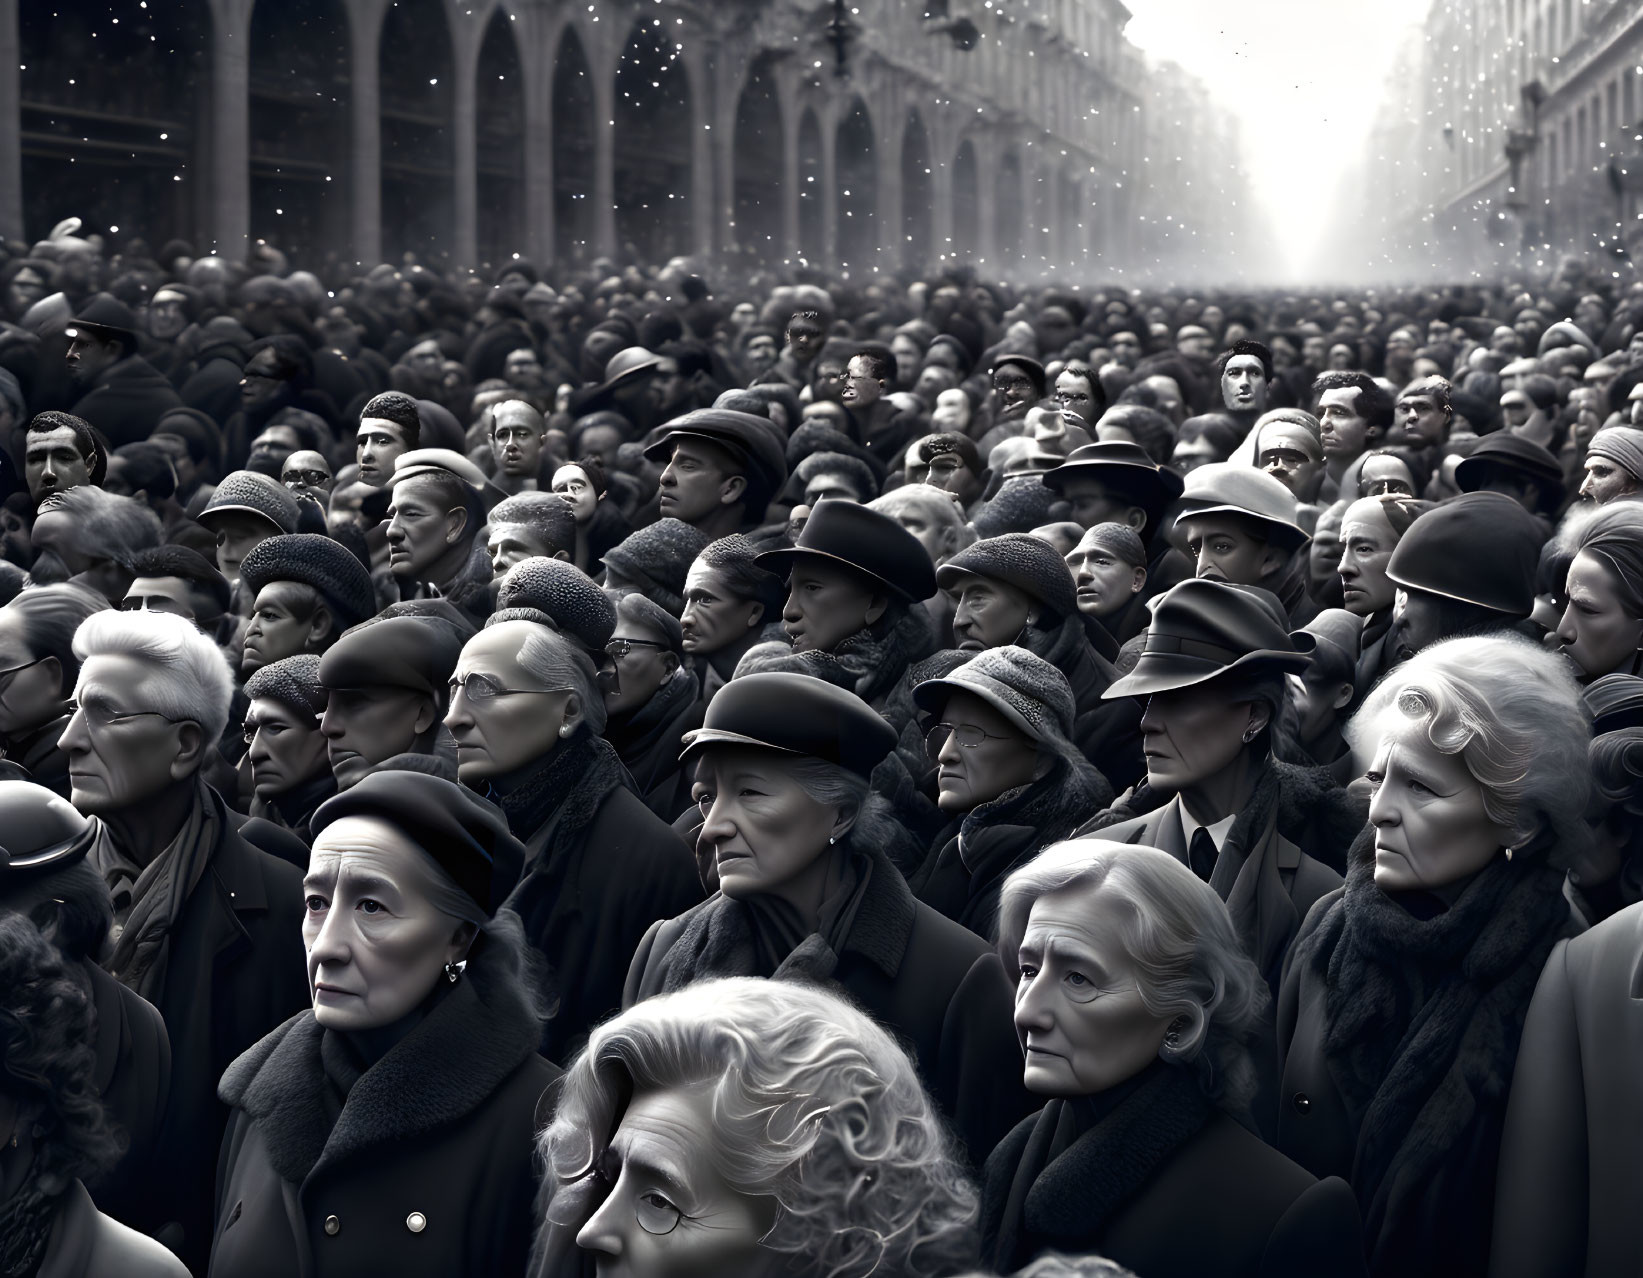 Monochrome image: Dense crowd with varied expressions and backlight.